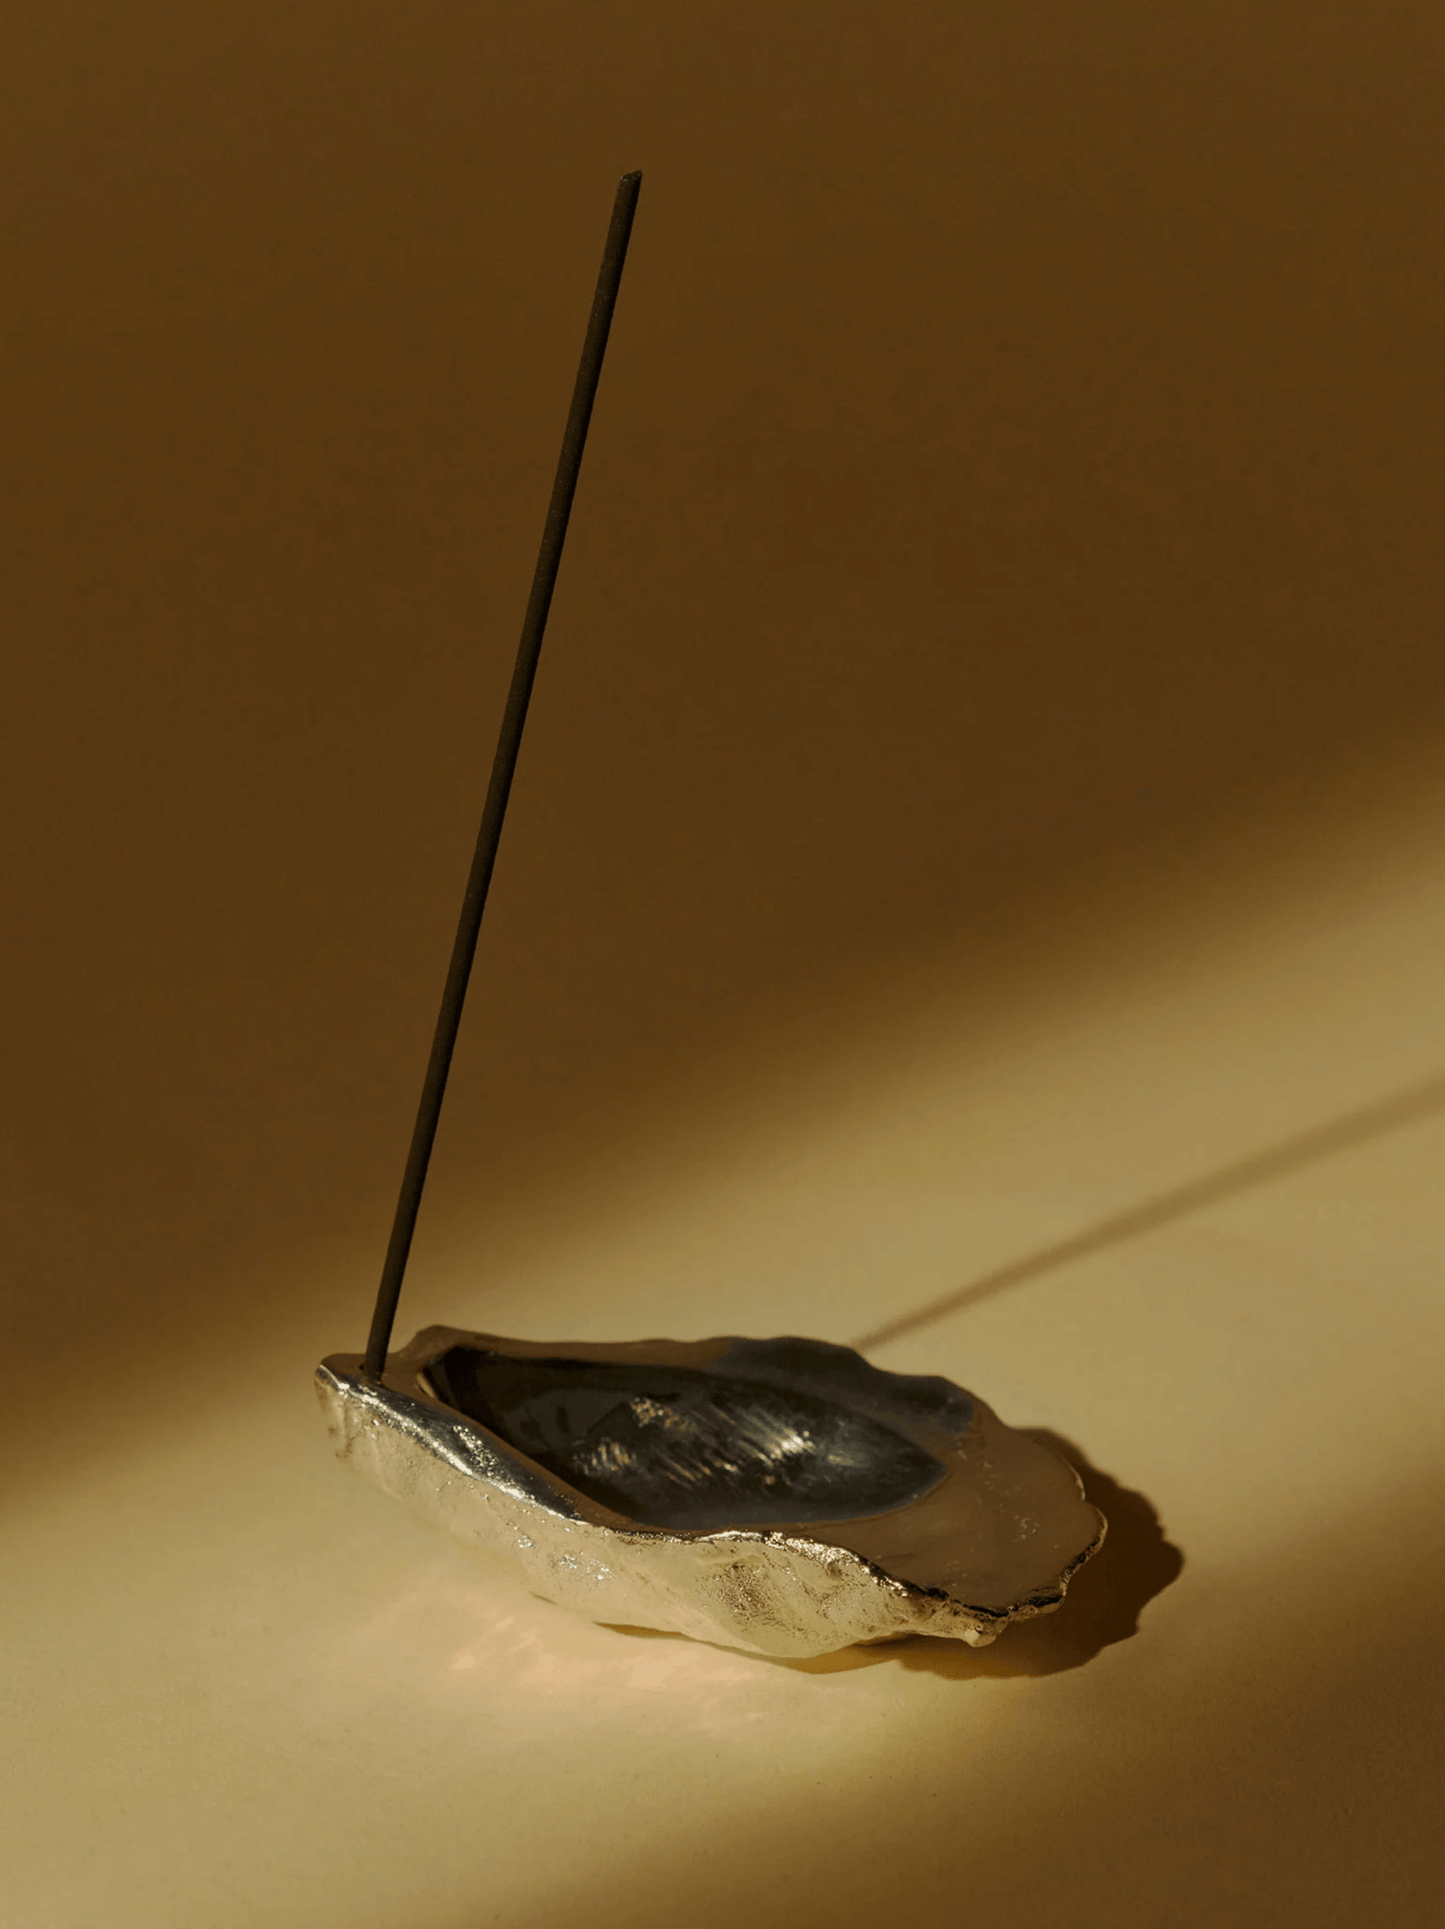 Oyster Incense Holder in Silver